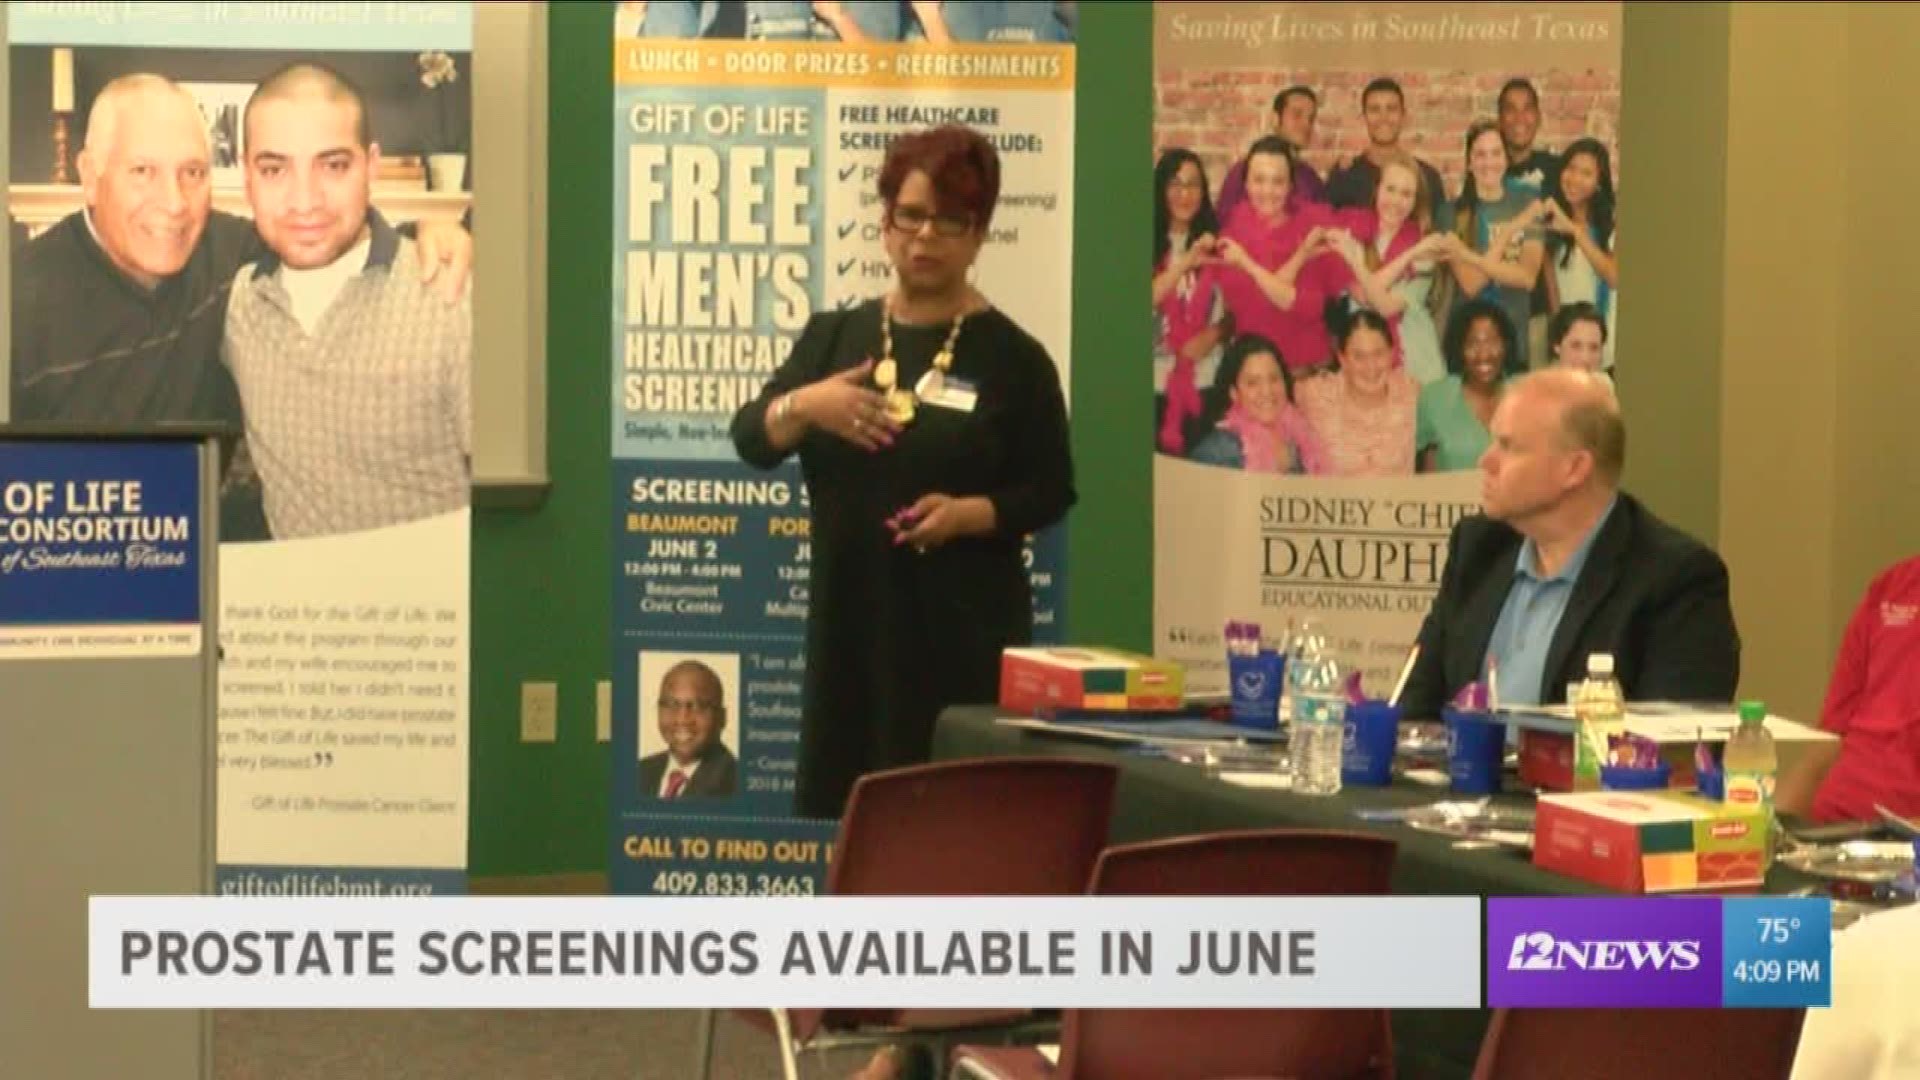 Gift of Life offers Southeast Texas men free health screenings, education